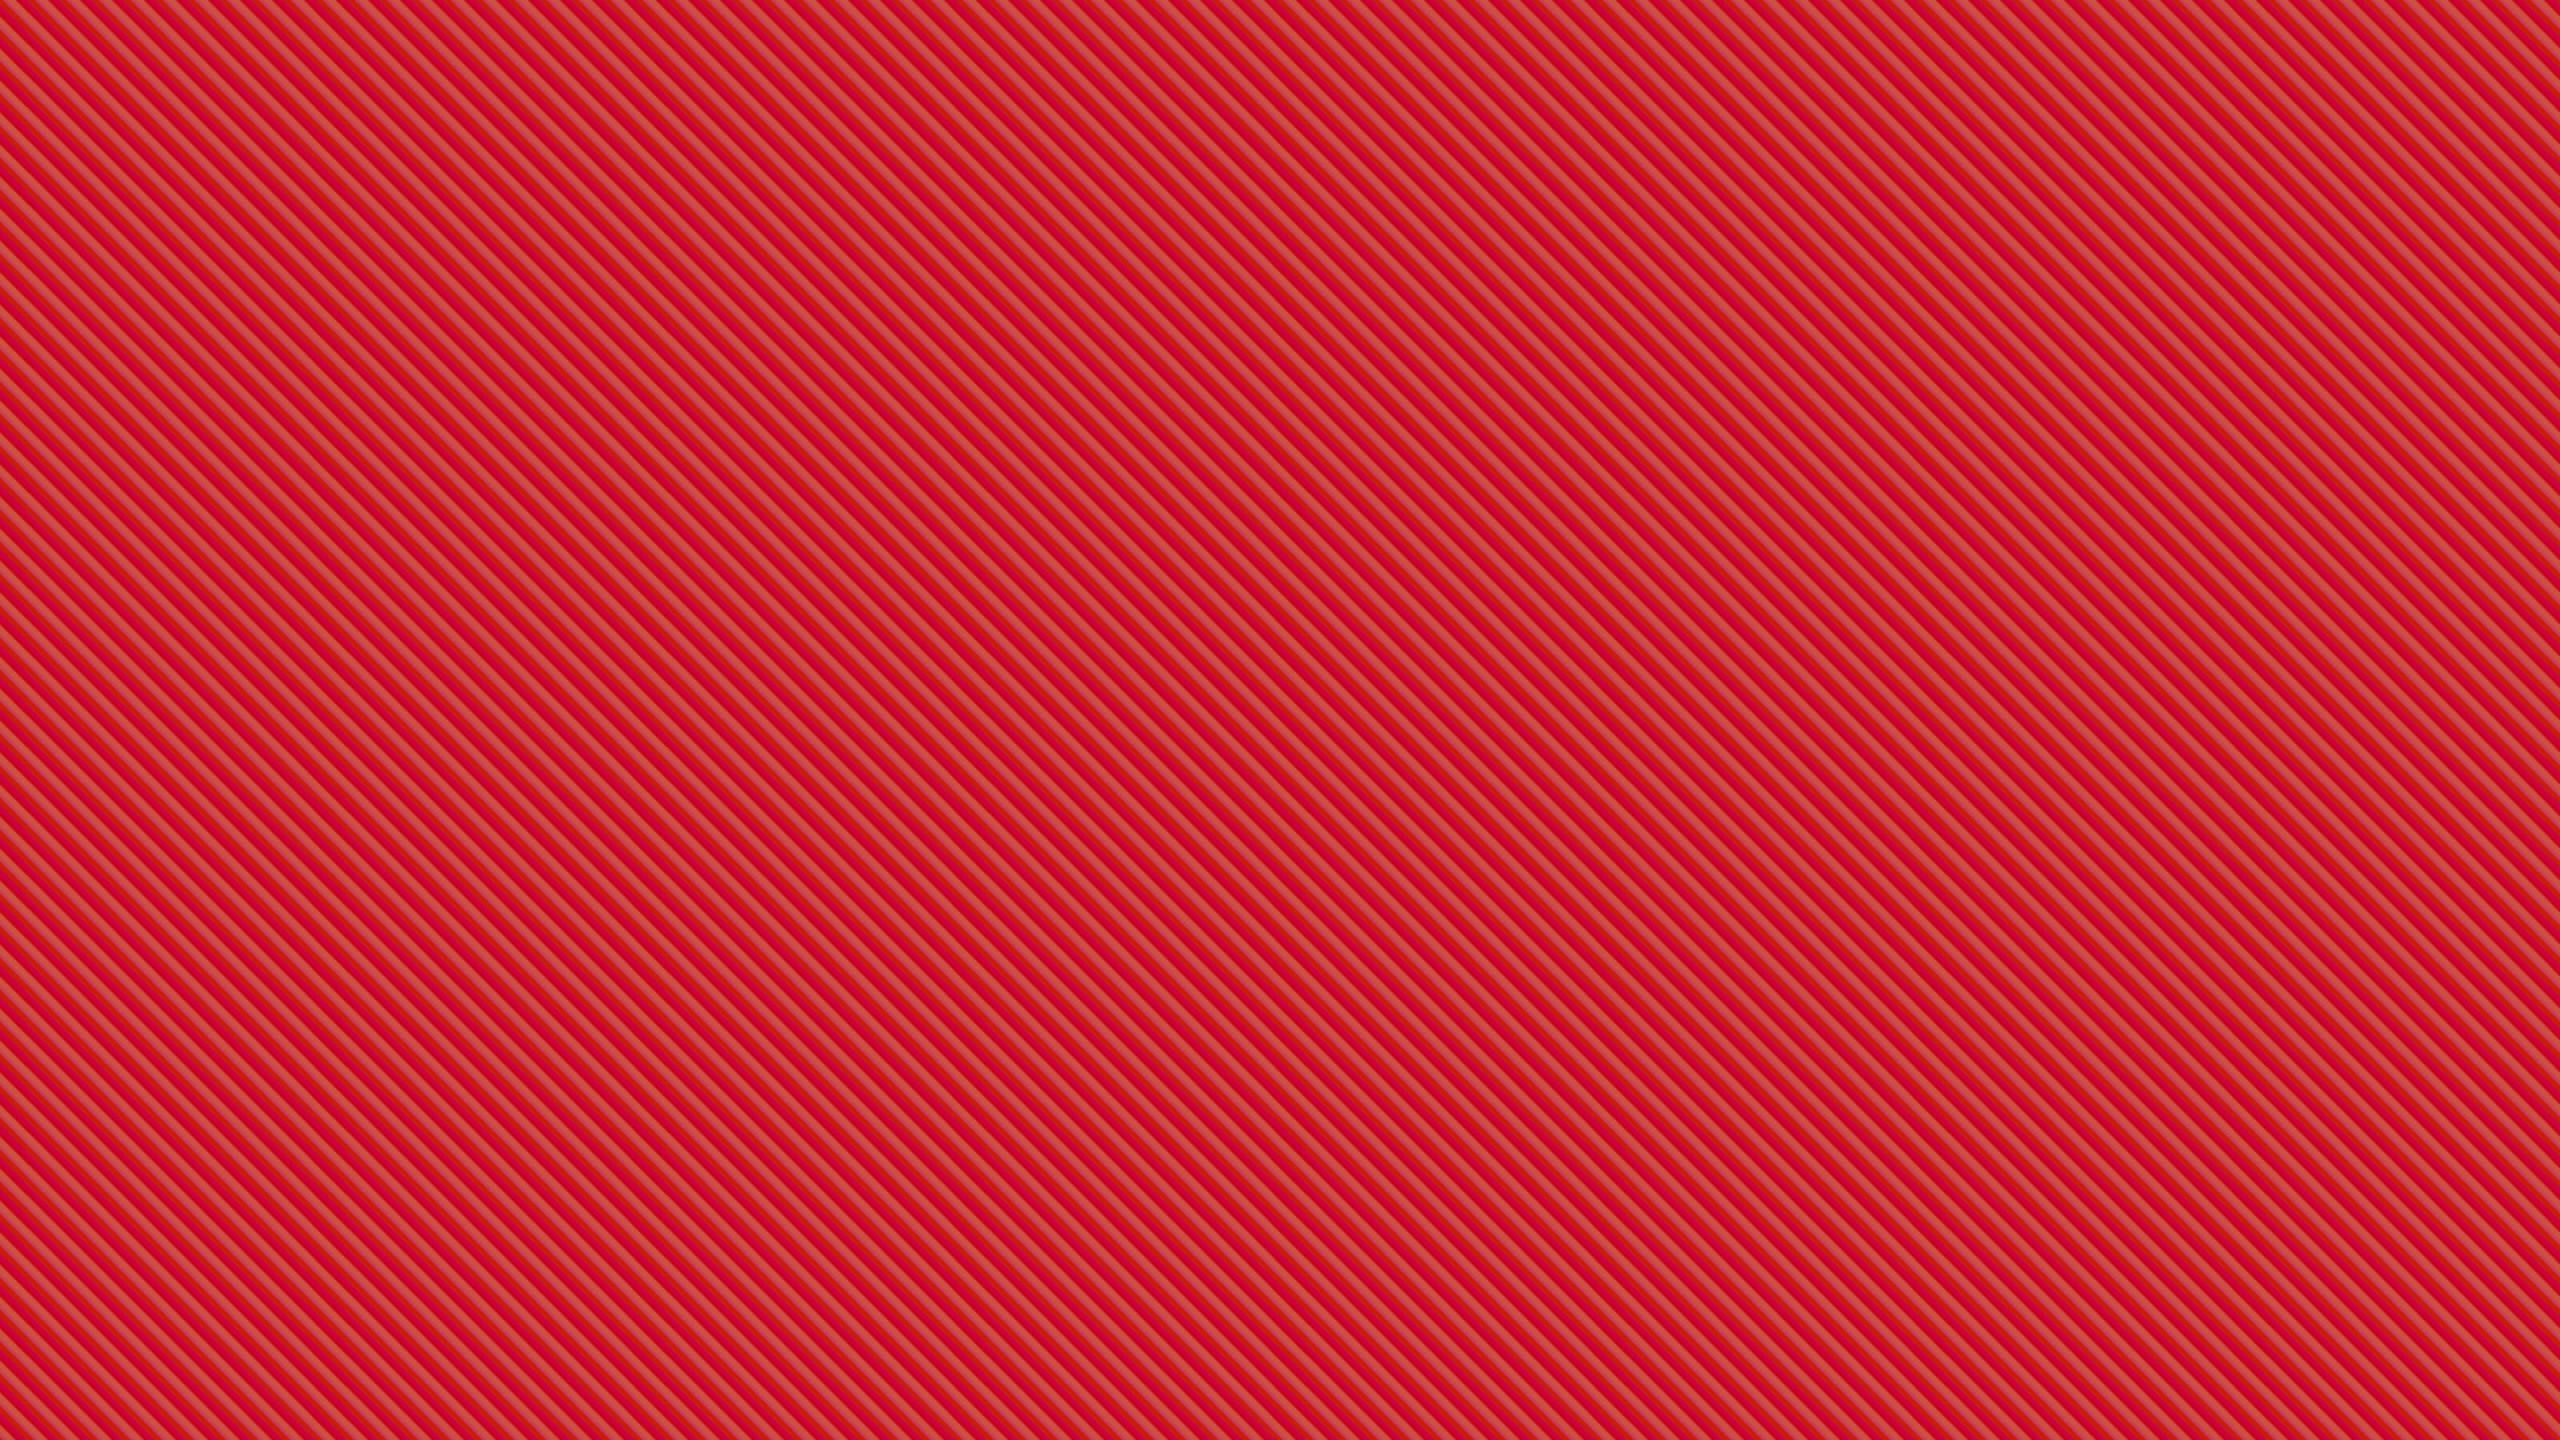 Red and White Striped Textile. Wallpaper in 2560x1440 Resolution